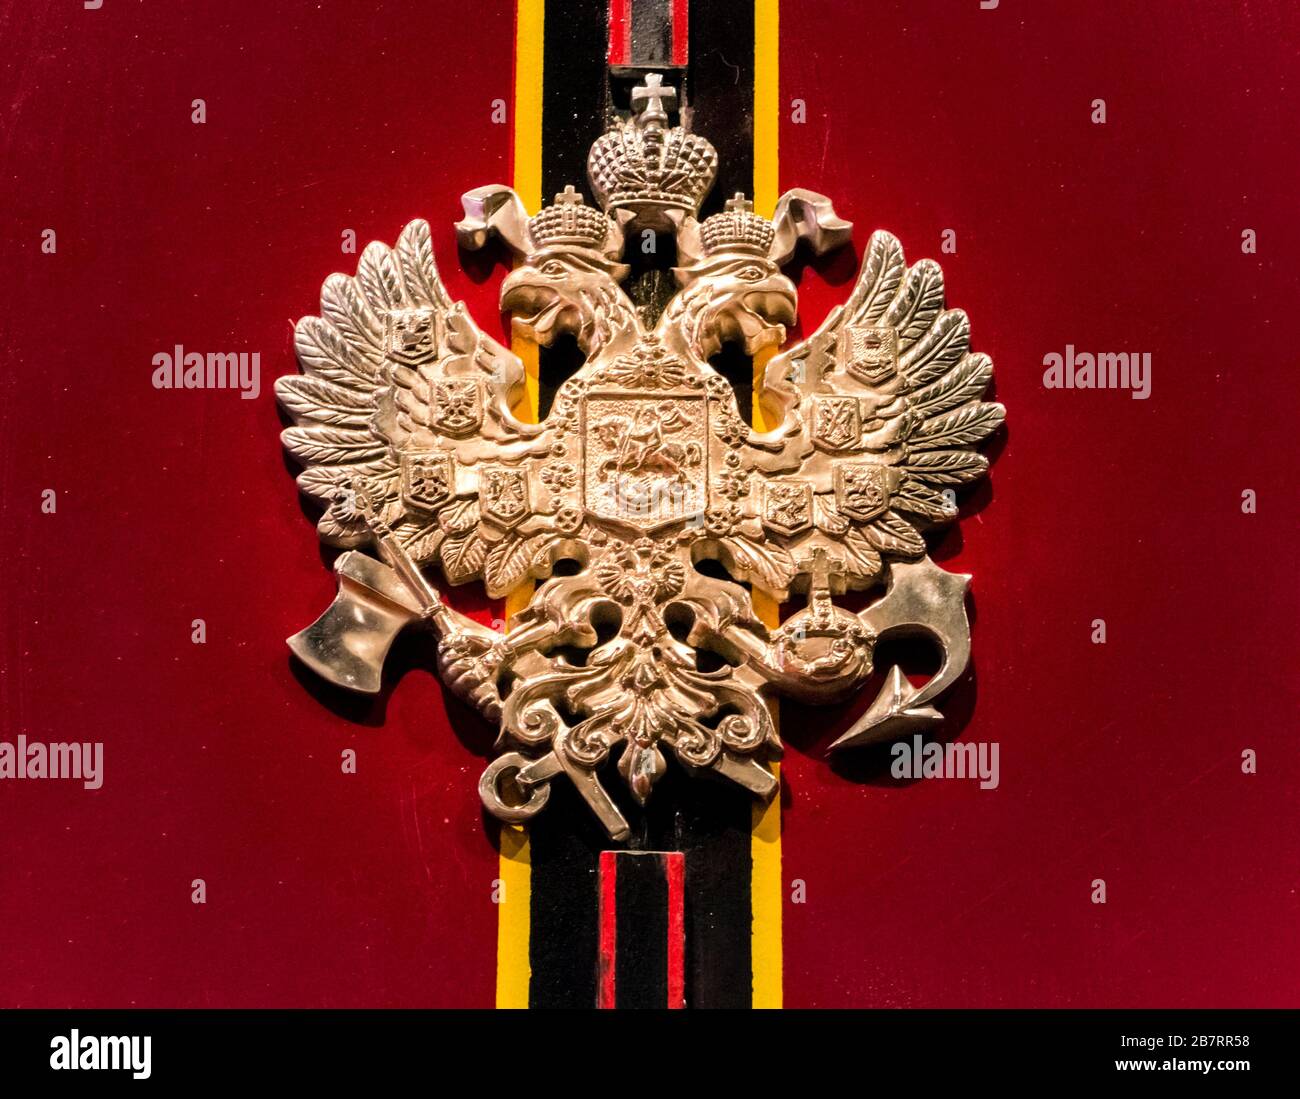 Premium Photo  Flag and the coat of arms of russia background for